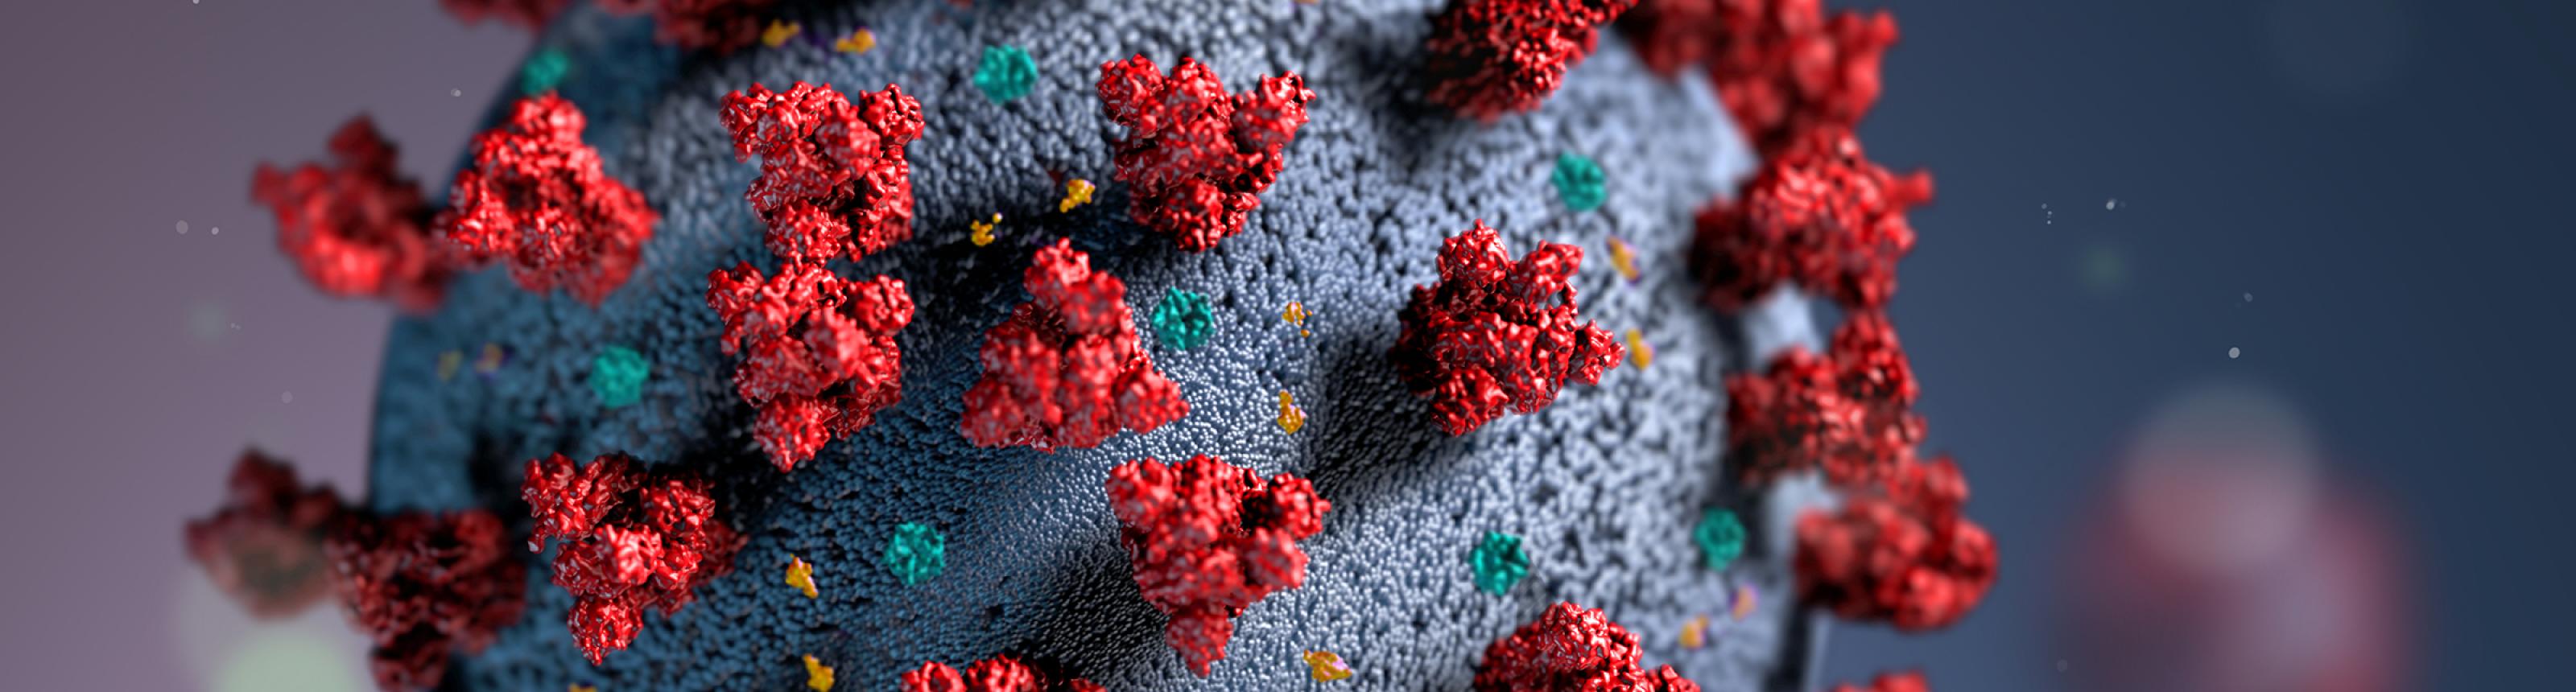 illustration of a SARS-CoV-2 virus particle